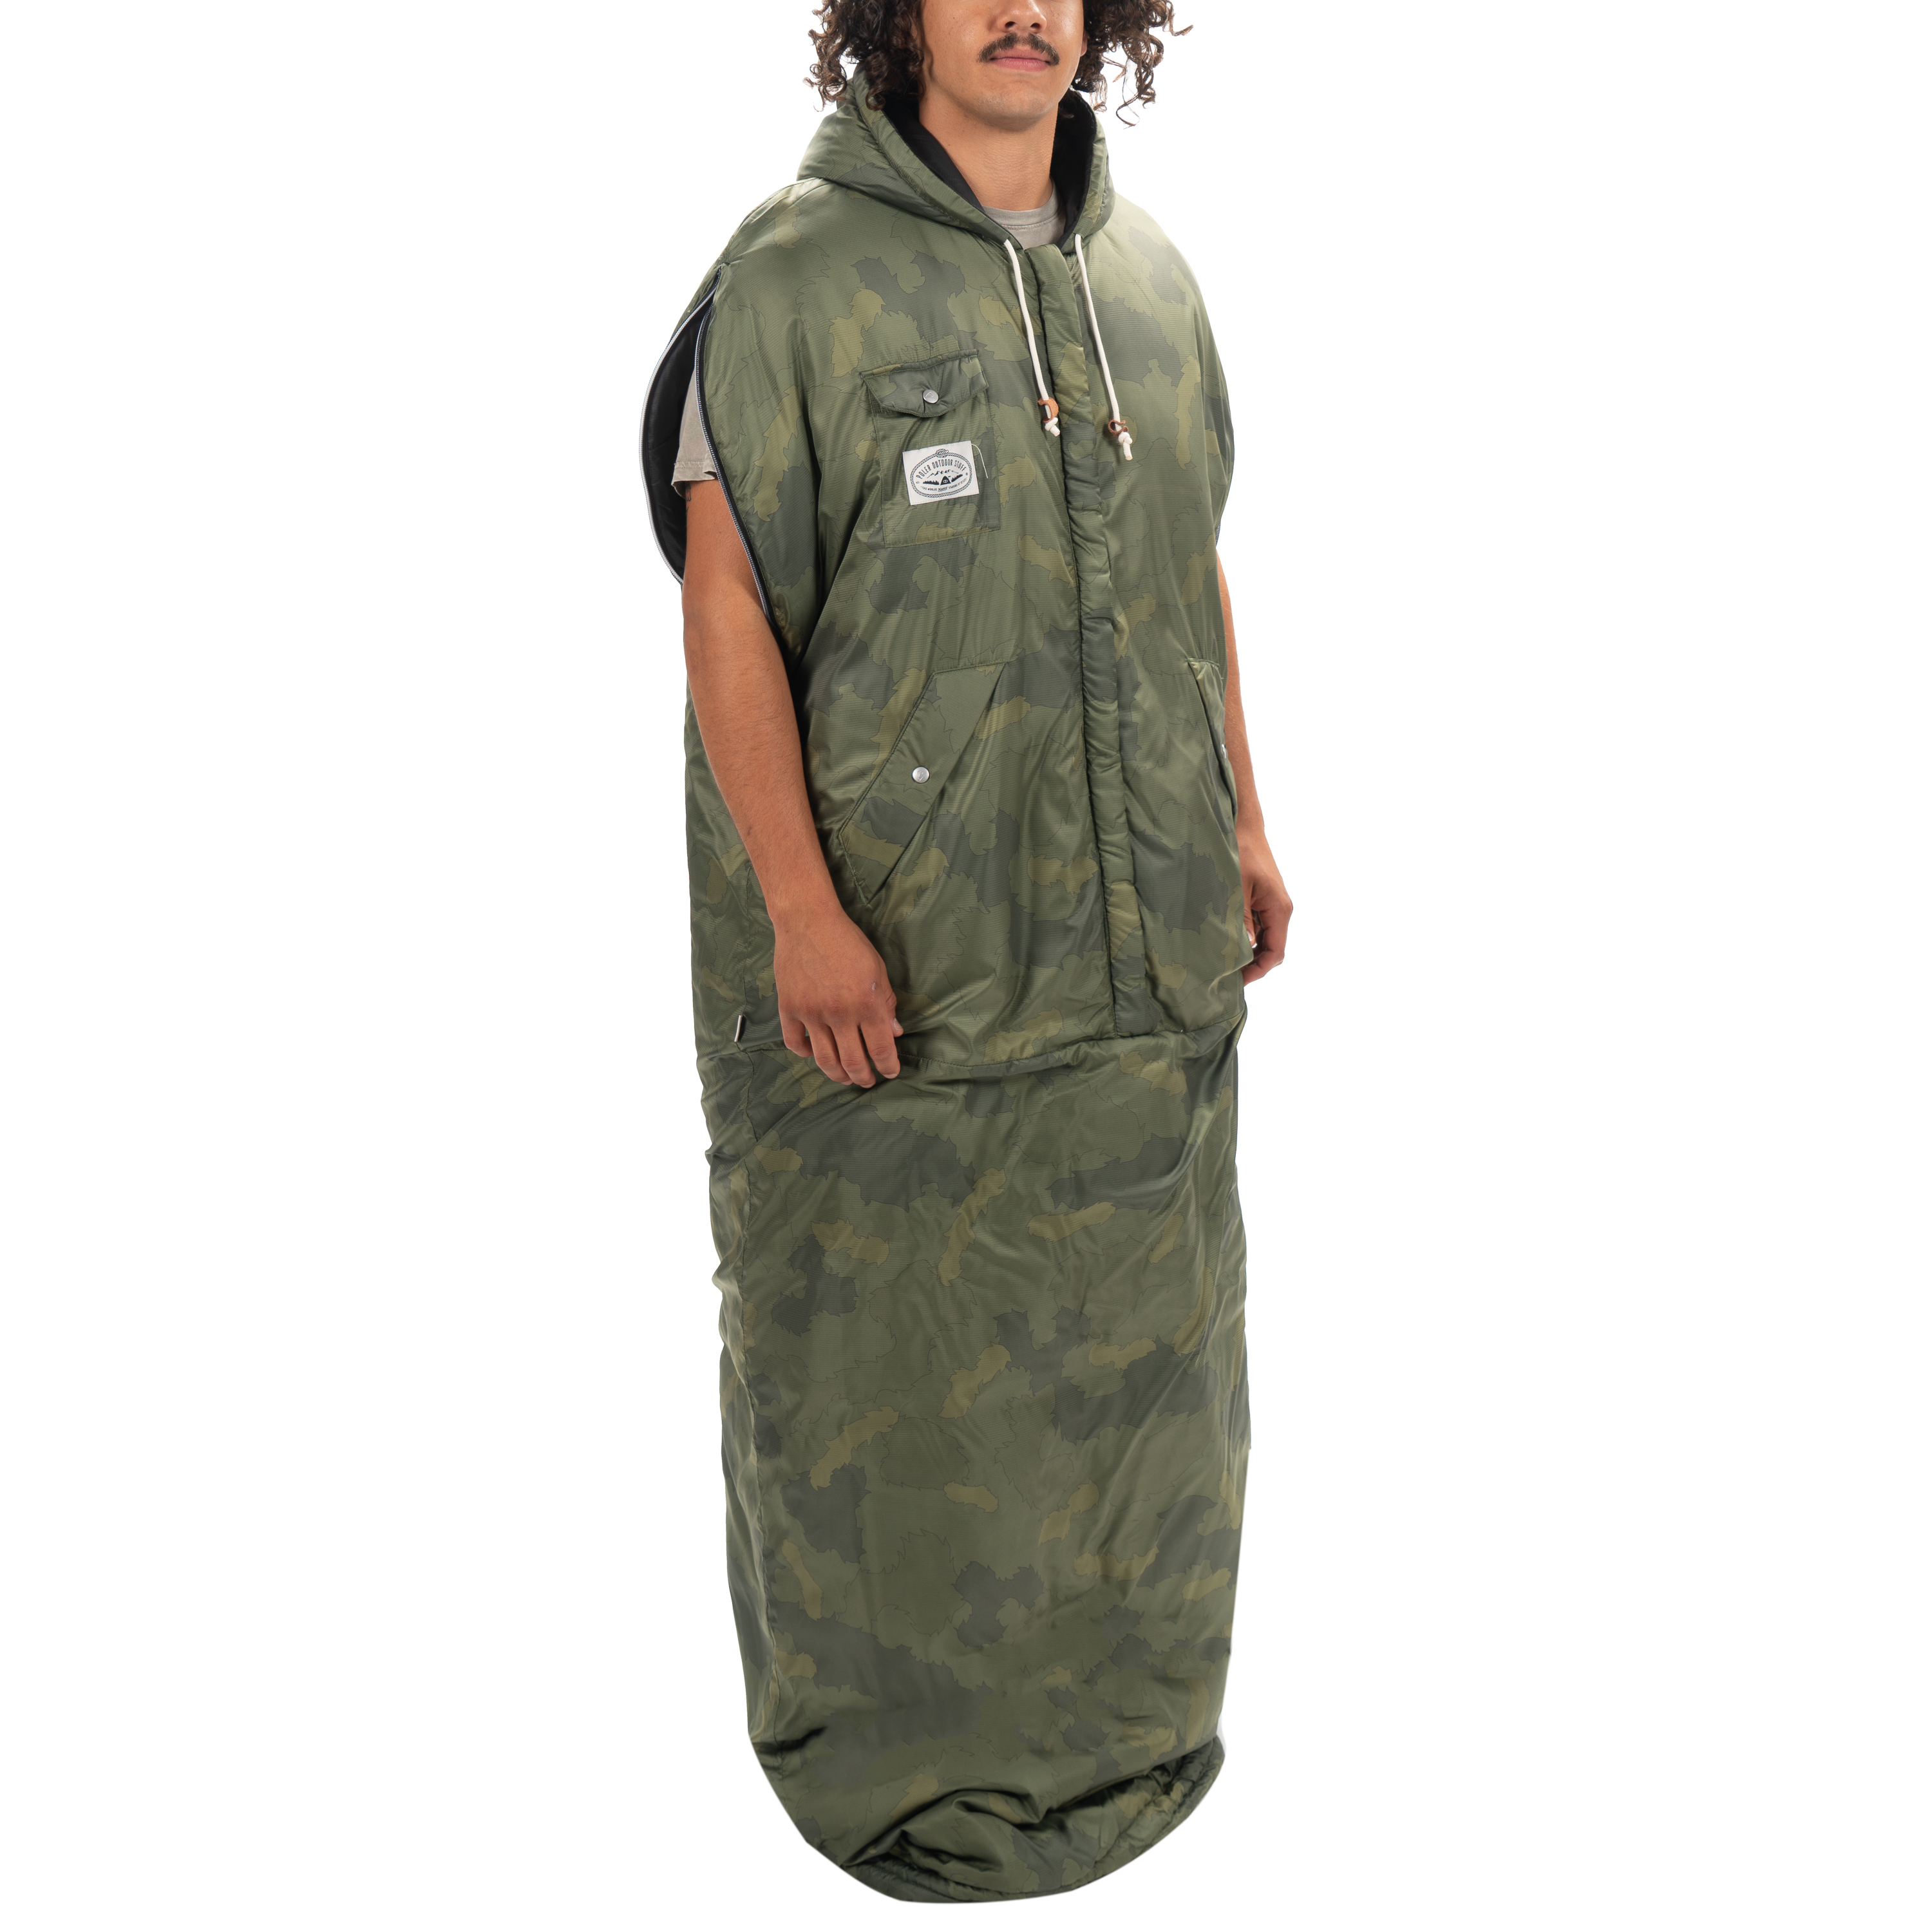 The Reversible Napsack